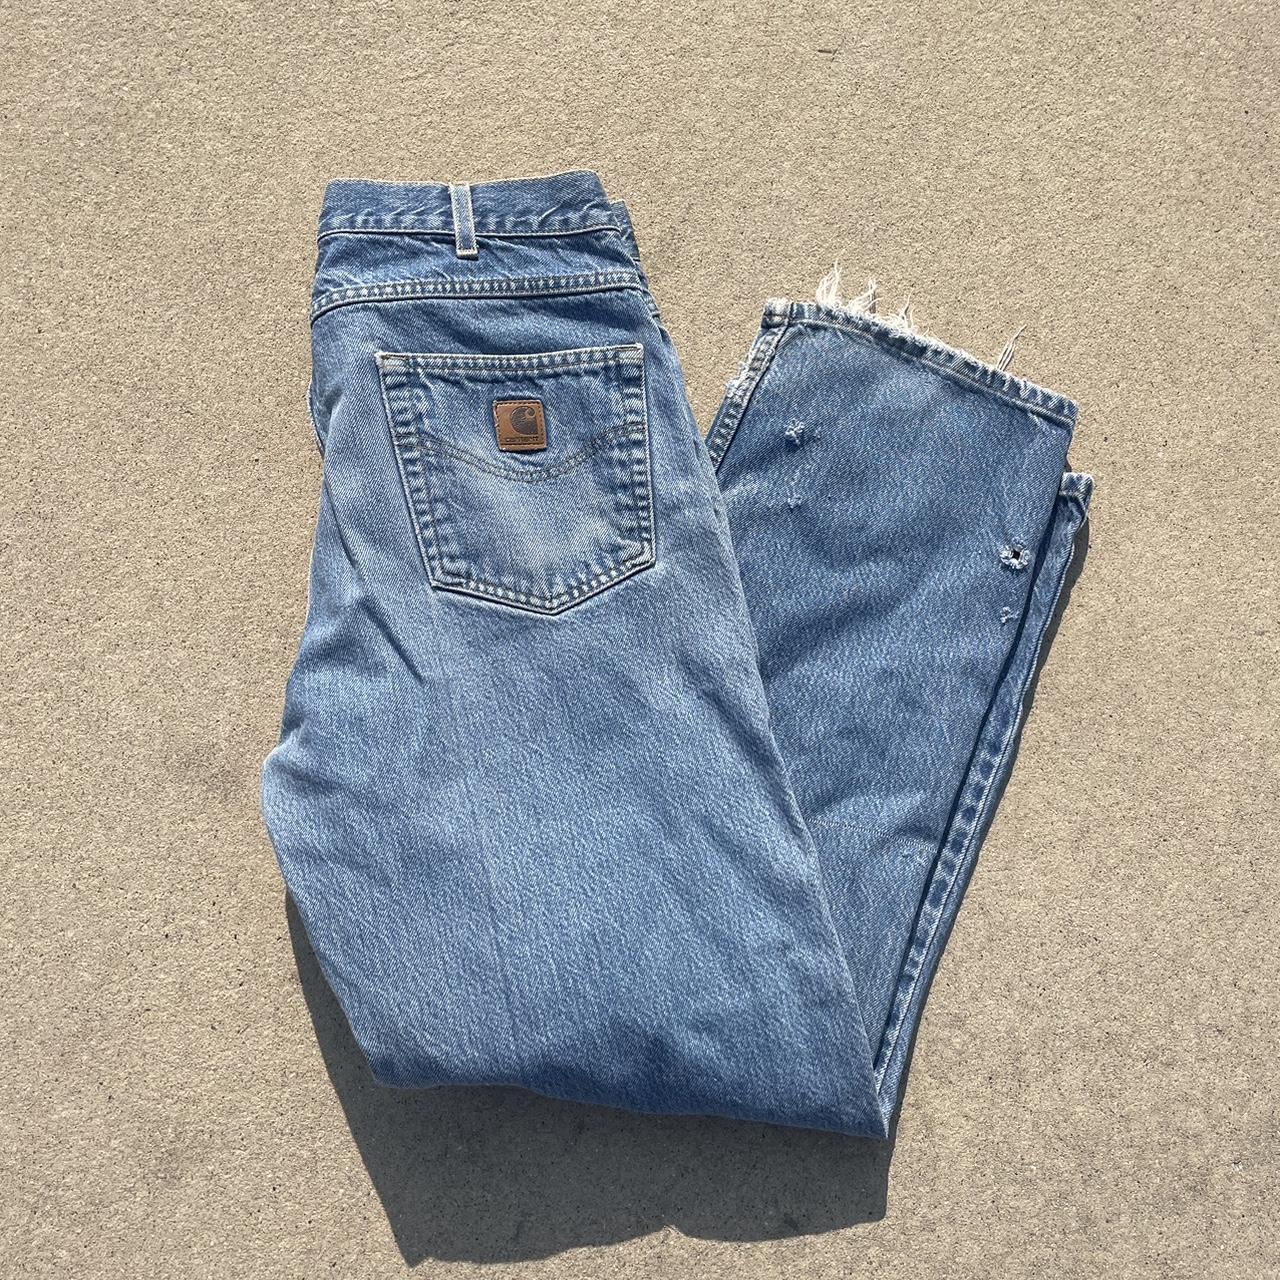 vintage carhartt jeans come as pictured size 38 x 34 - Depop